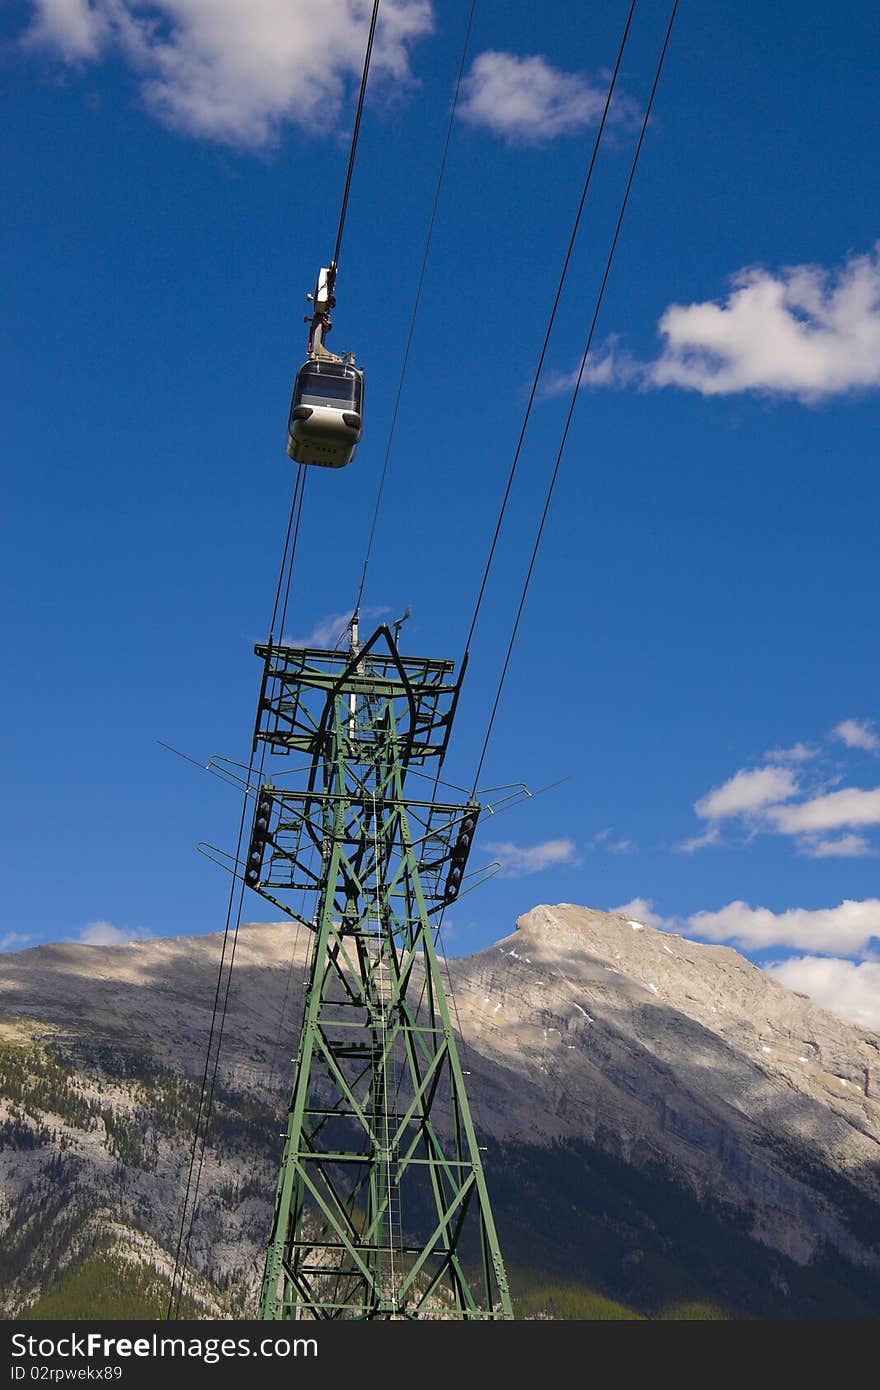 Banff Sulphur Mountain Gondola on a blue sky with snow peaked Rocky Mountains in background.